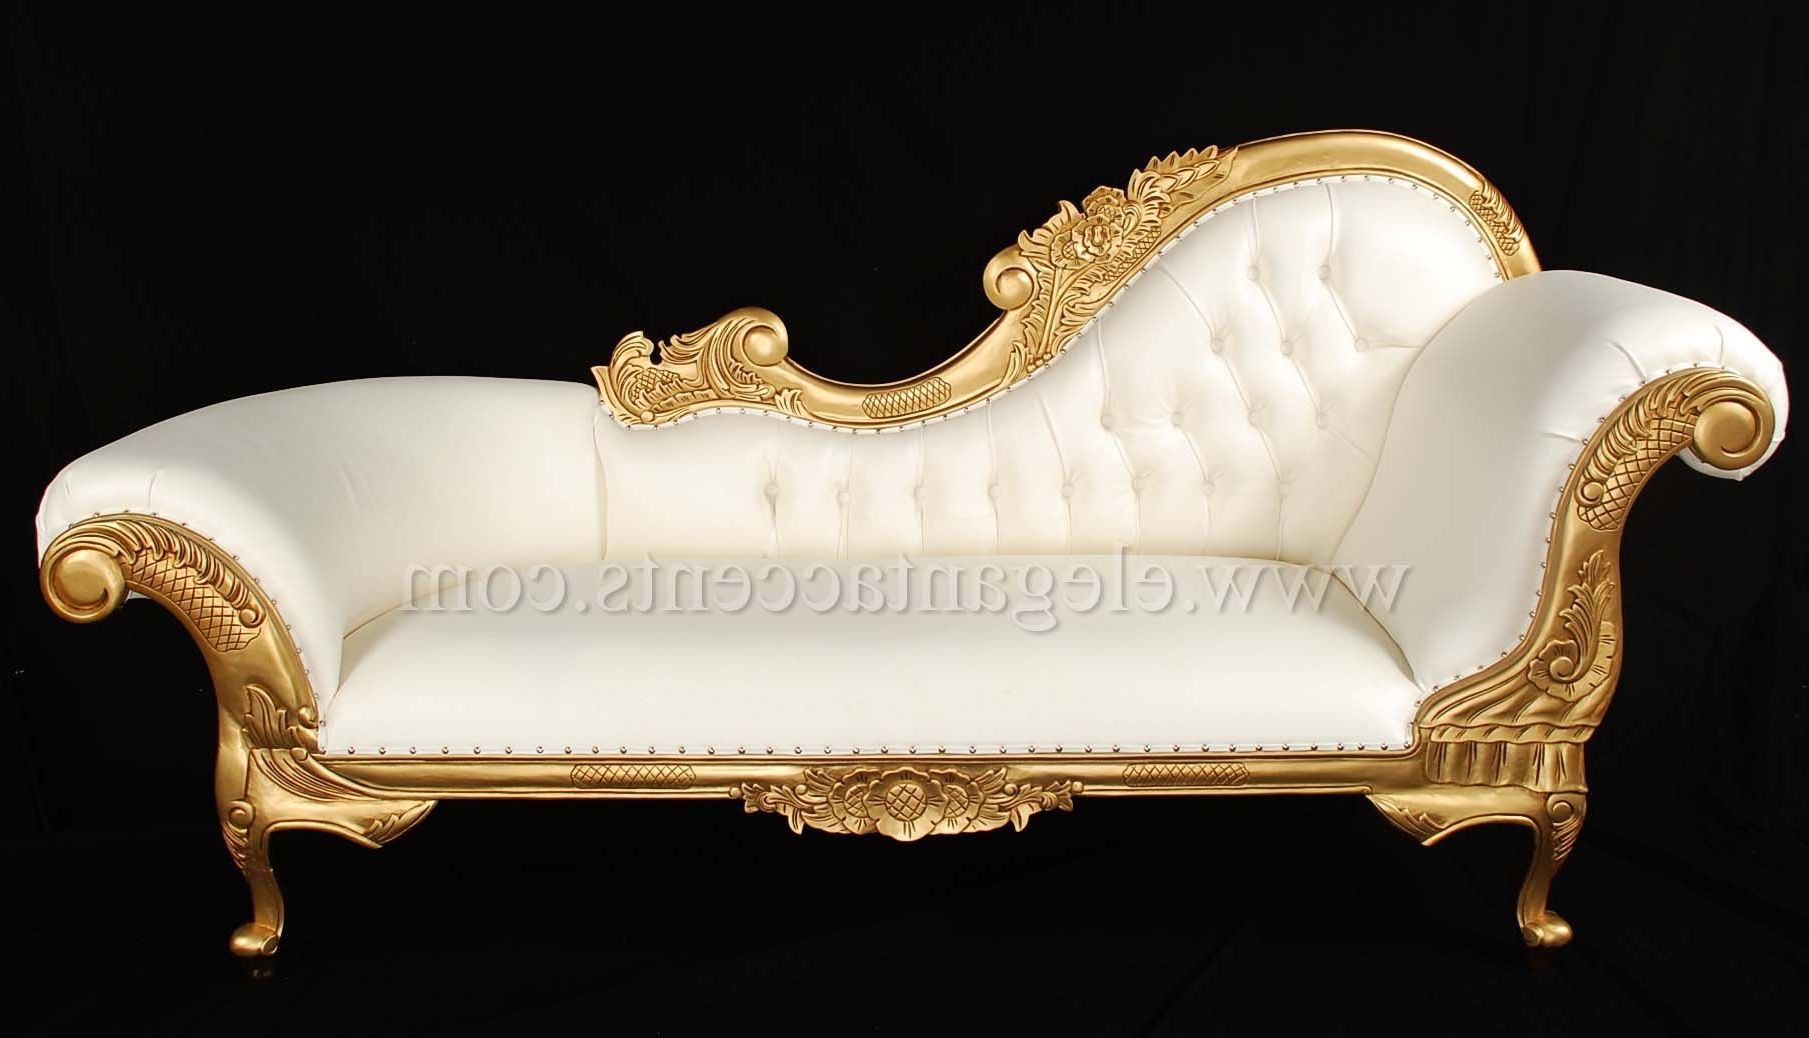 Gold Chaise Lounges In Most Recent This Truly Sumptuous "hood" Chaise Lounge, With Stylized Carving (View 2 of 15)